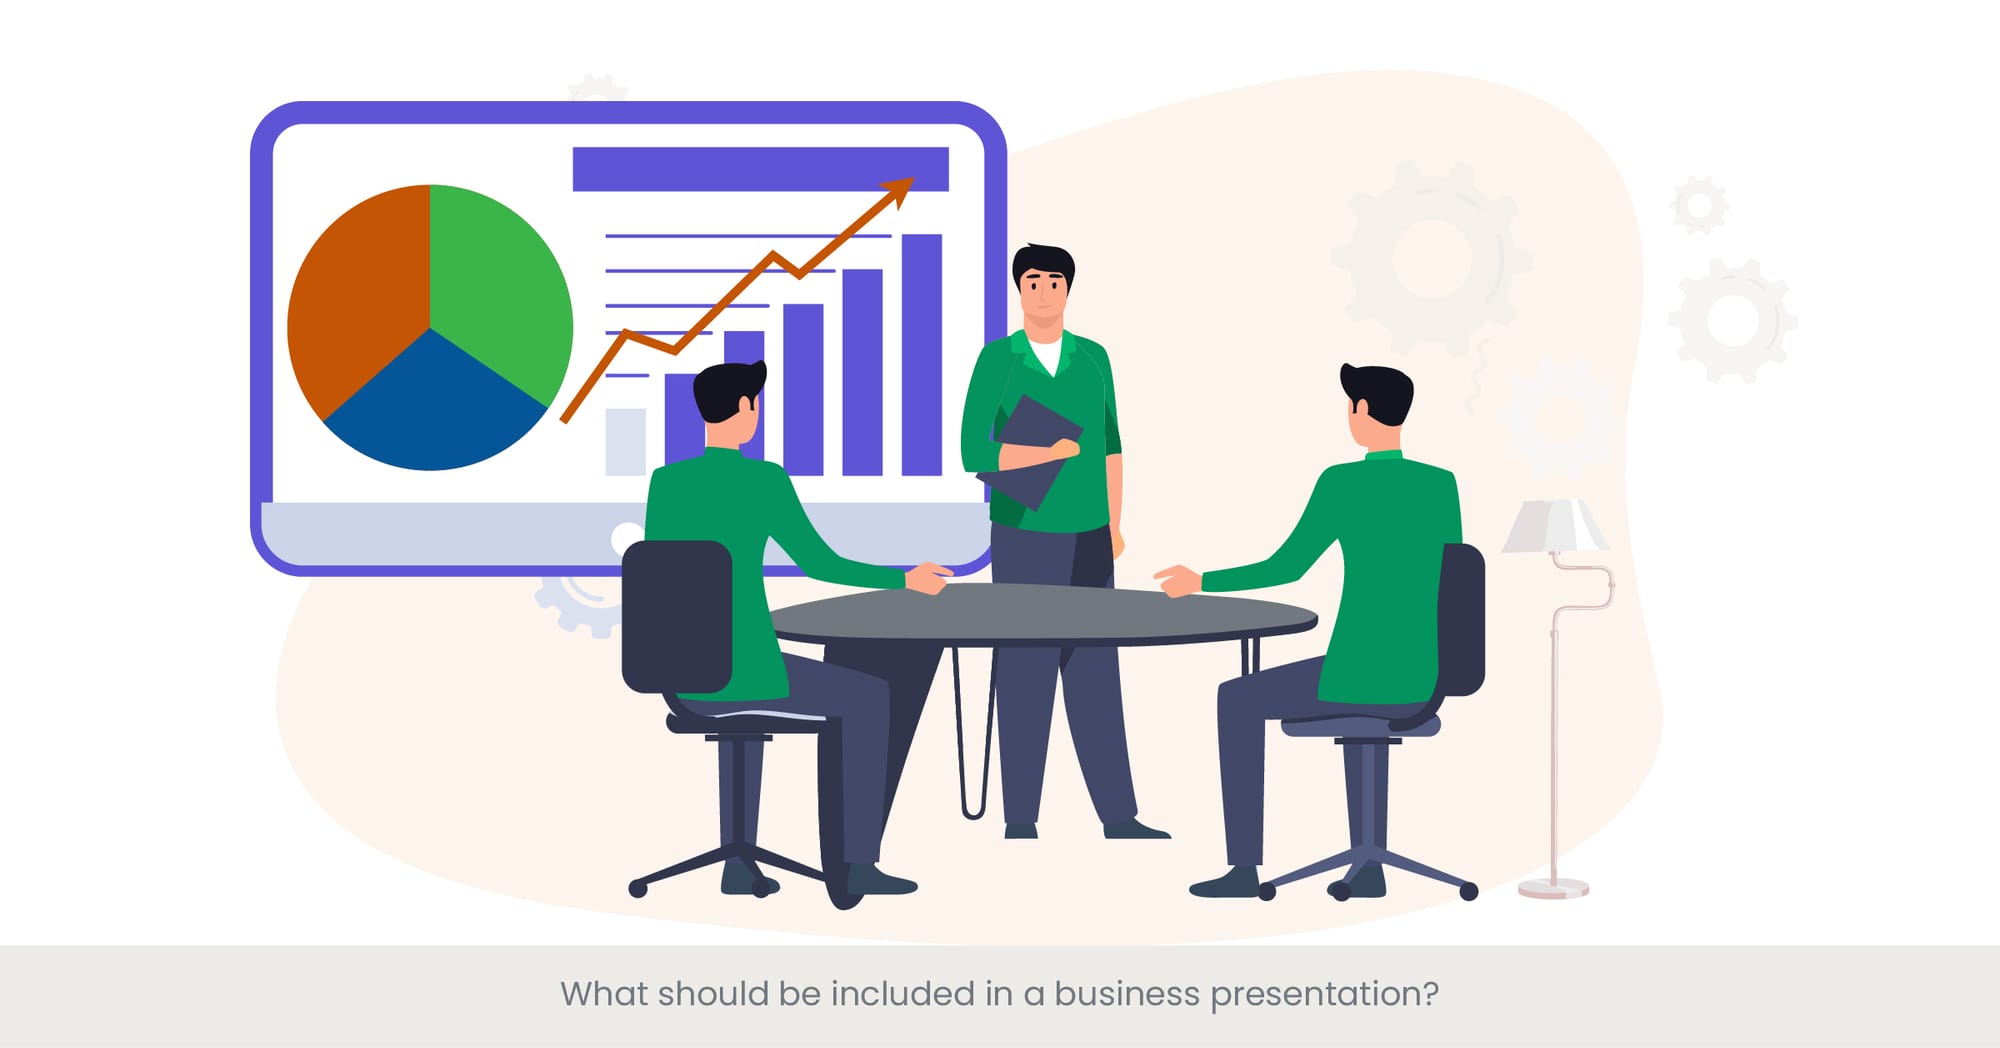 What should be included in a business presentation